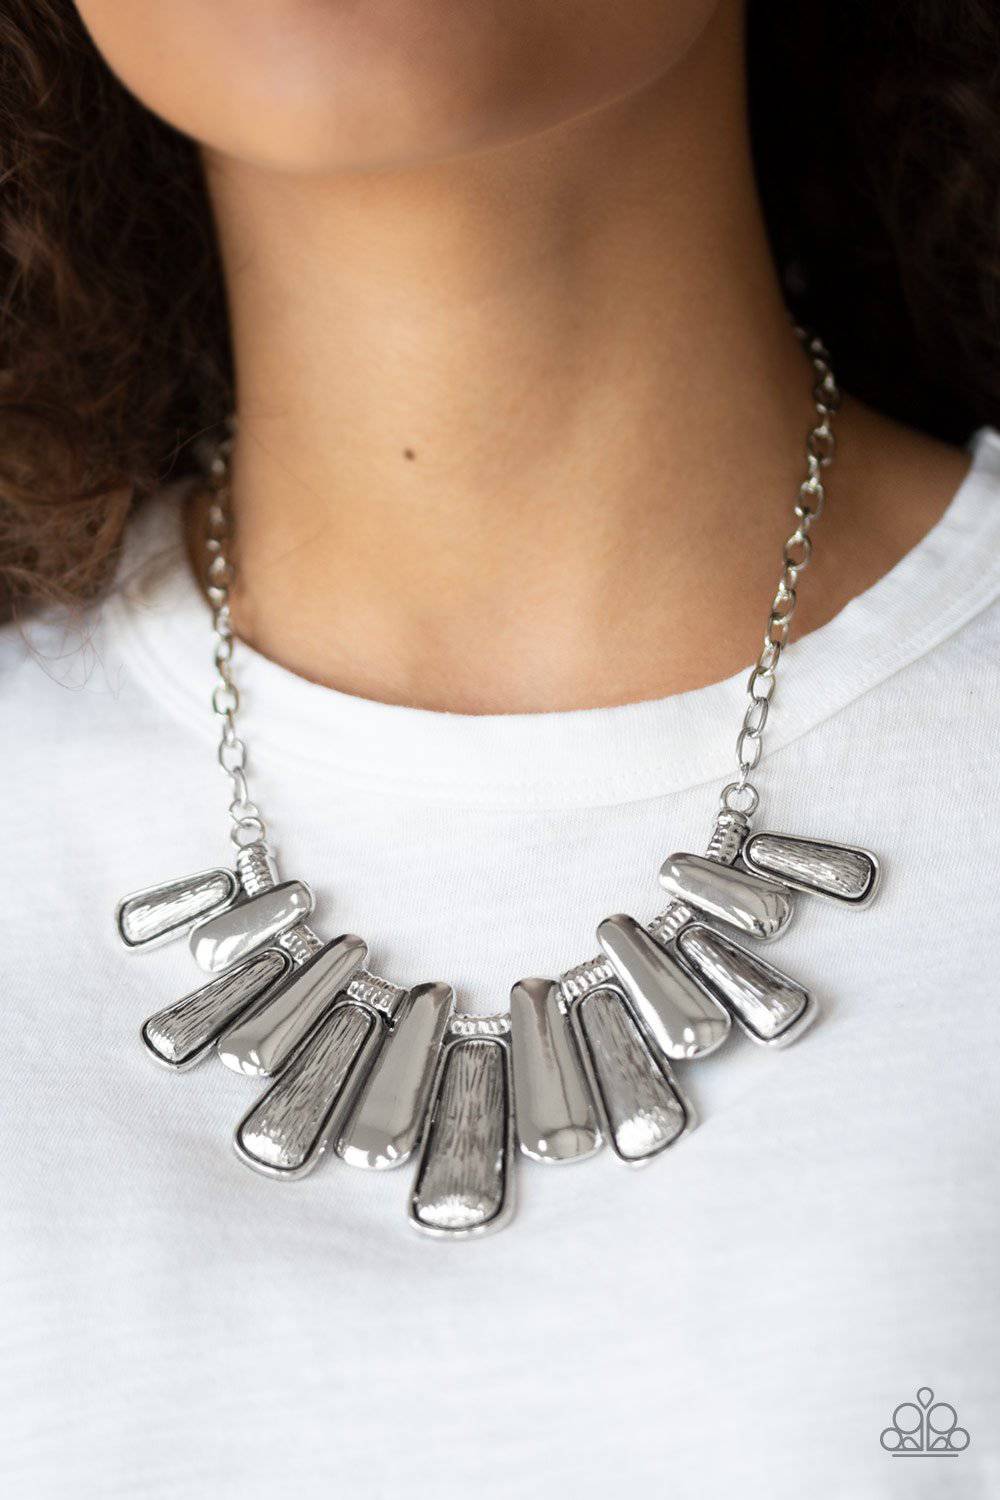 MANE Up - Silver Necklace - Paparazzi Accessories - GlaMarous Titi Jewels